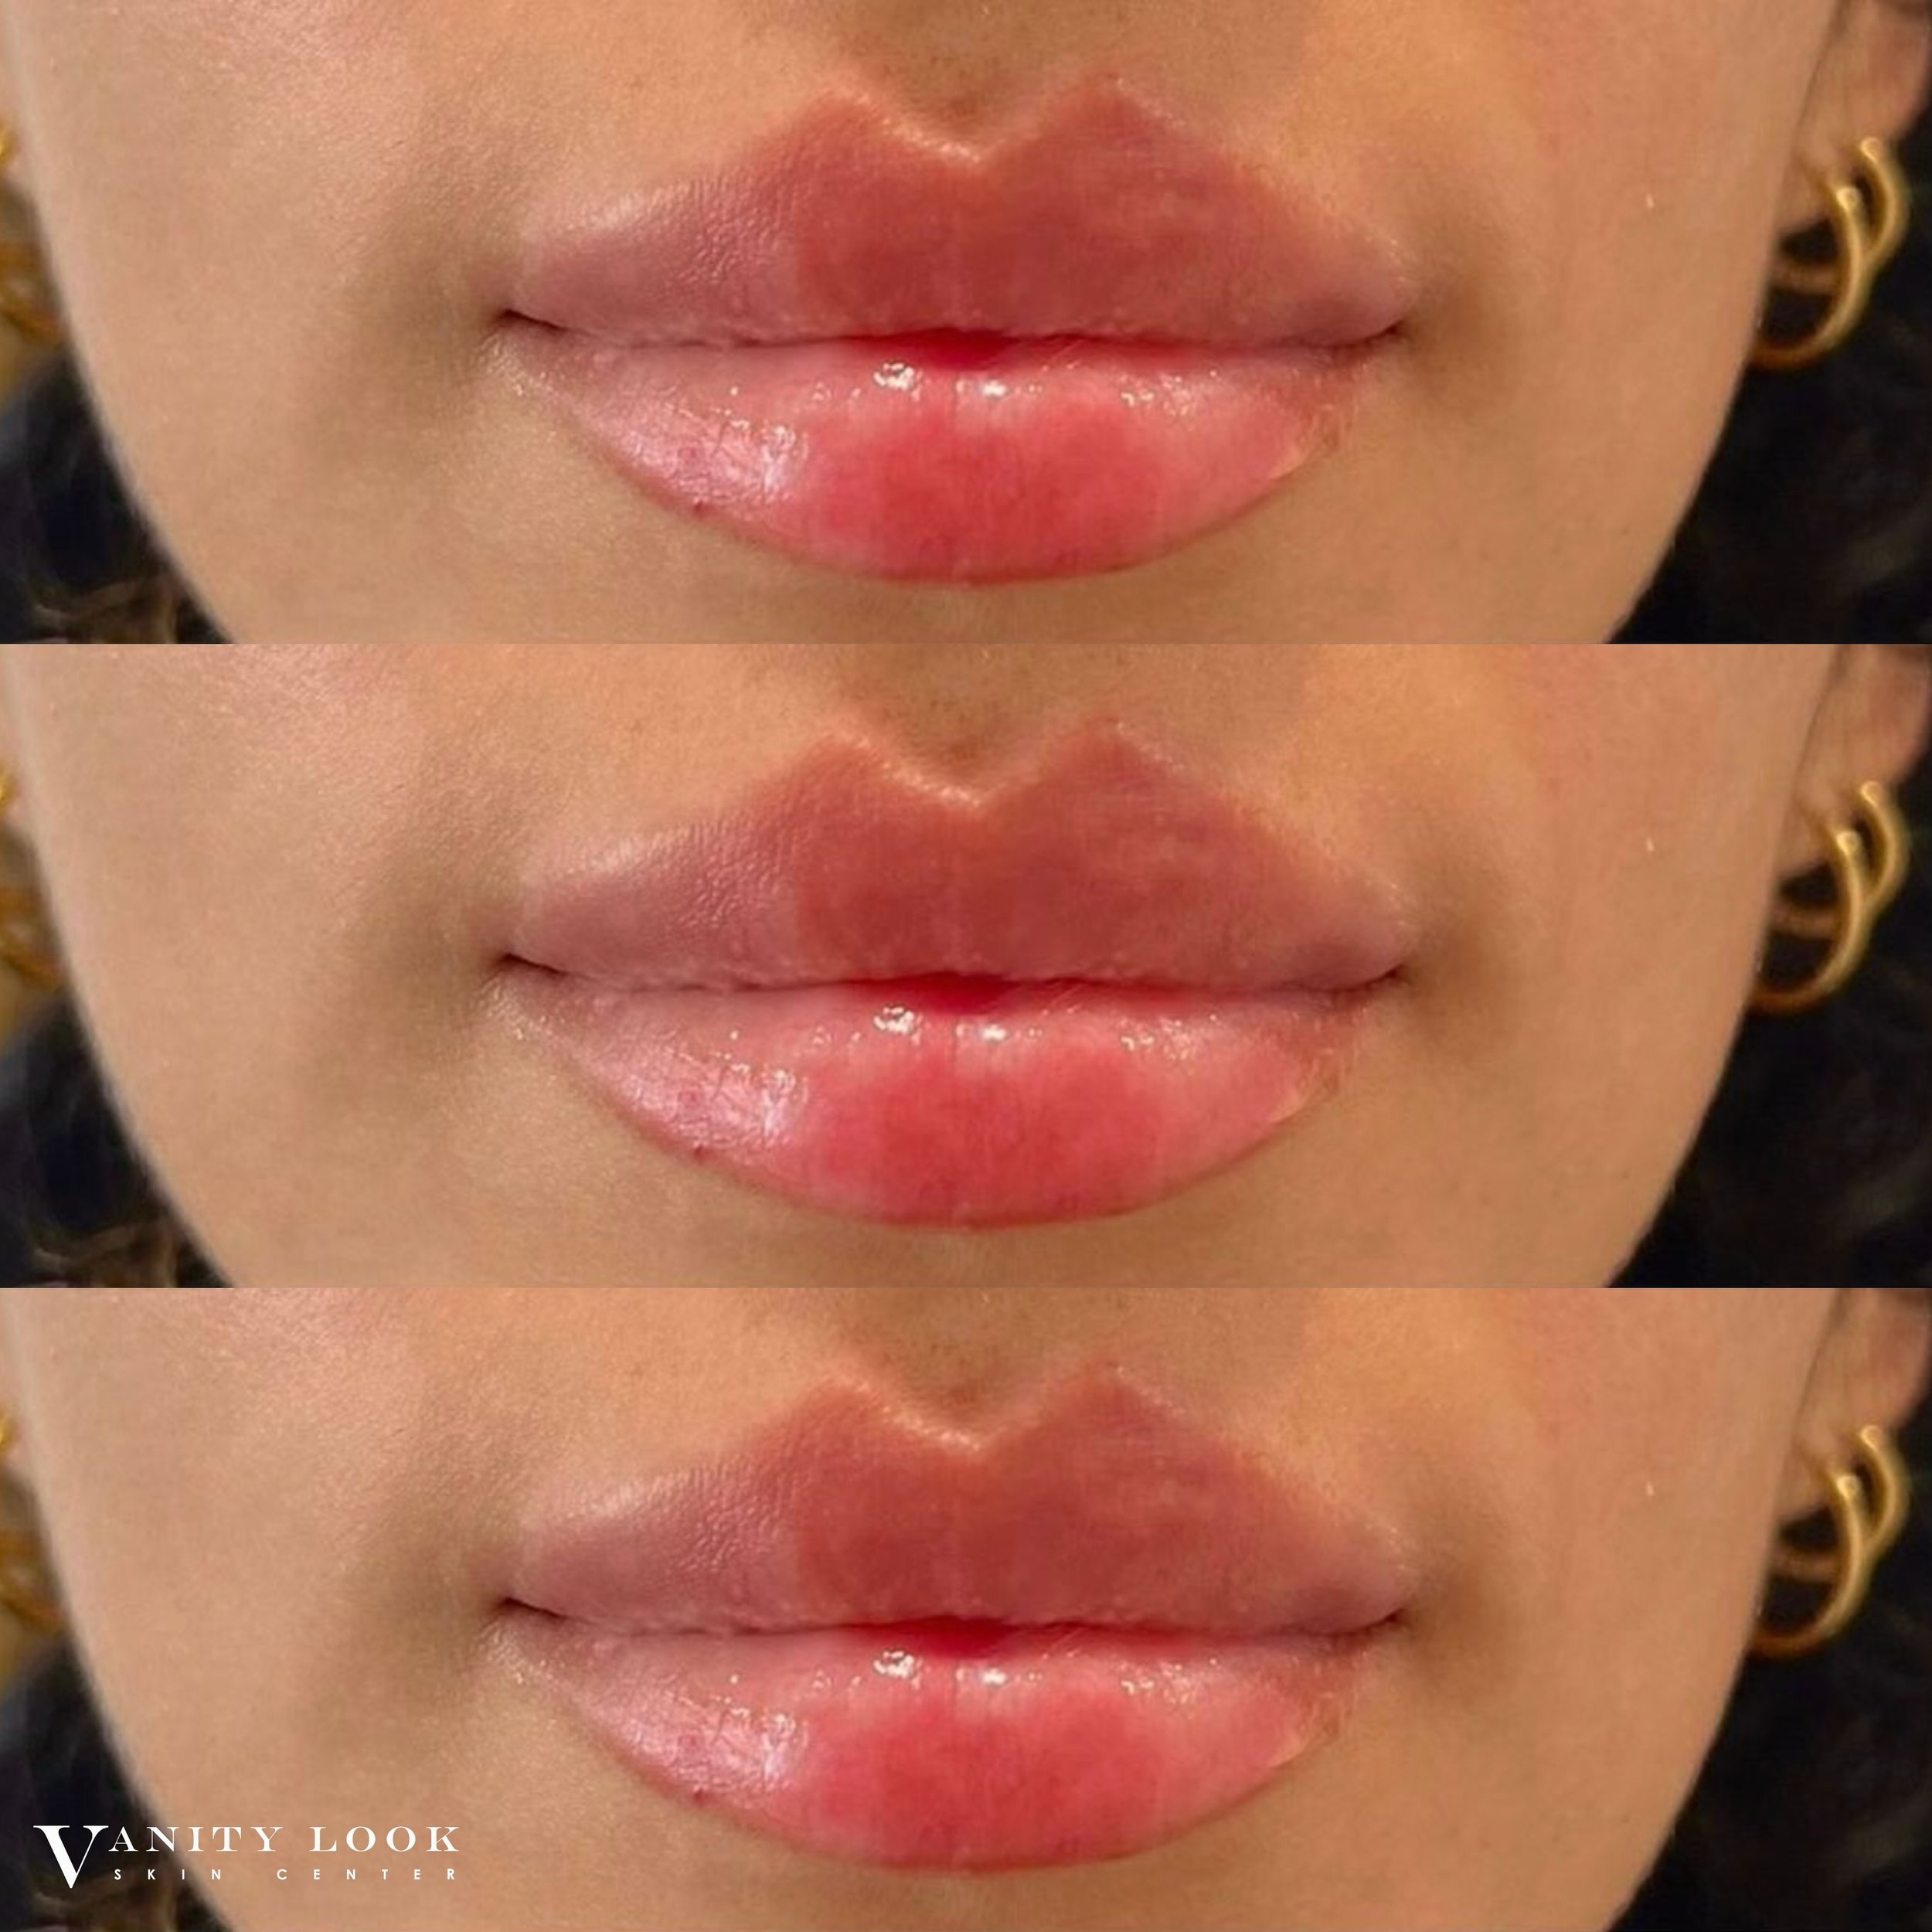 This lip shape! 💉👄 Double tap if you love it! 💕

Services we offer:
▪️ Fillers 
▪️ Anti-aging treatments
▪️ Facial Balancing
▪️ Laser Hair Removal
▪️ Skin Rejuvenation
▪️ Morpheus8 for face and body
▪️ PRX Derm Perfexion
▪️ Aquagold
▪️ SkinVive
▪️